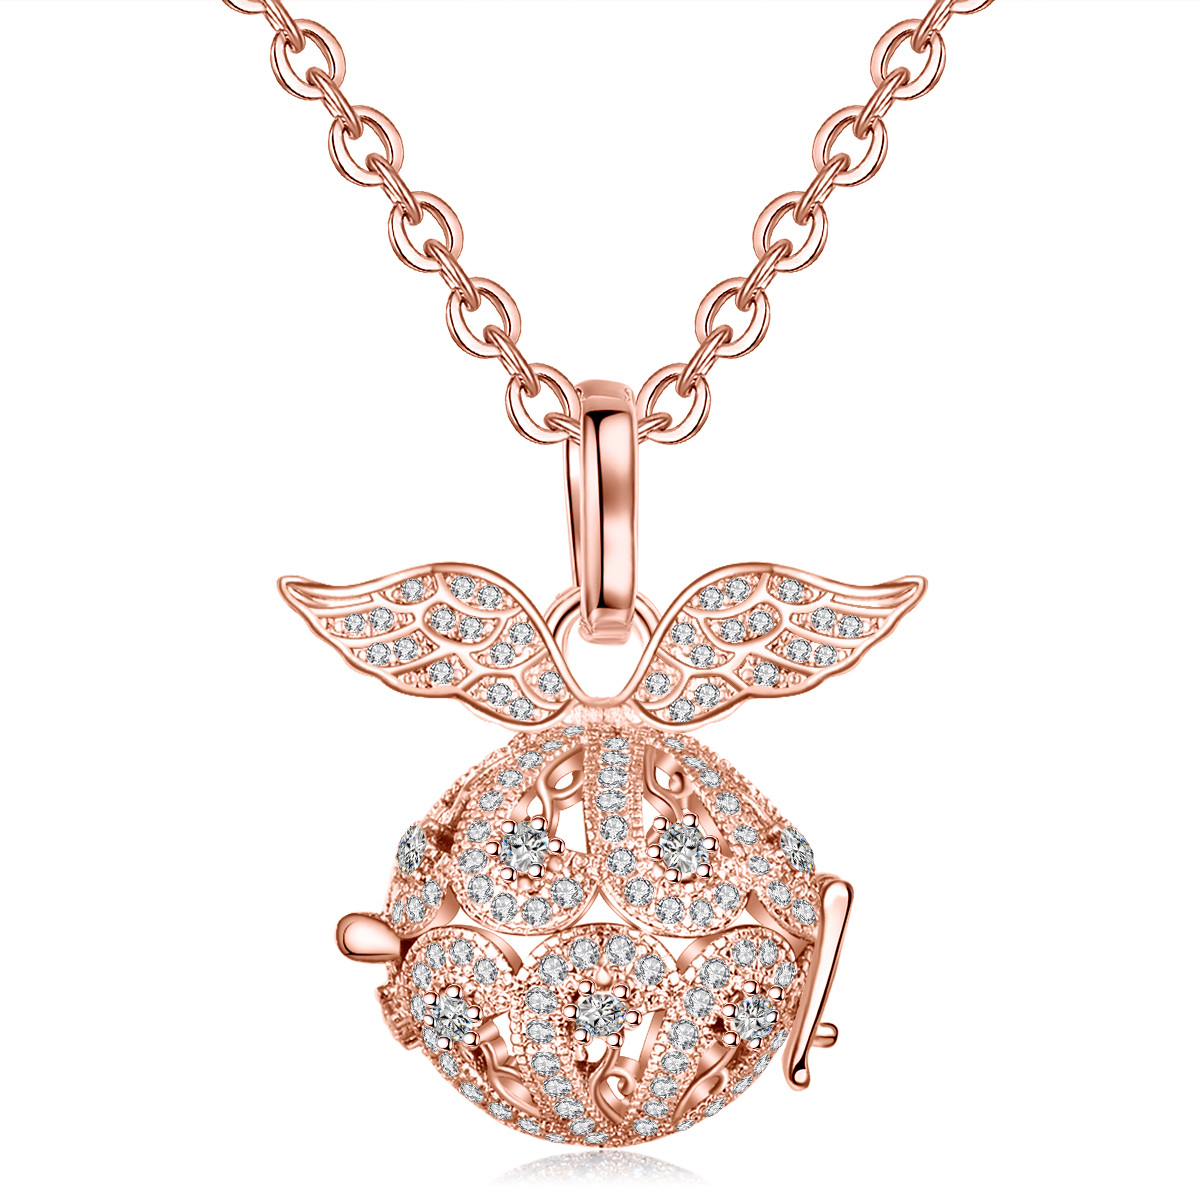 Rose Gold Rhinestone Oil Aromatherapy Diffuser angel chime harmony cage necklace chain for women